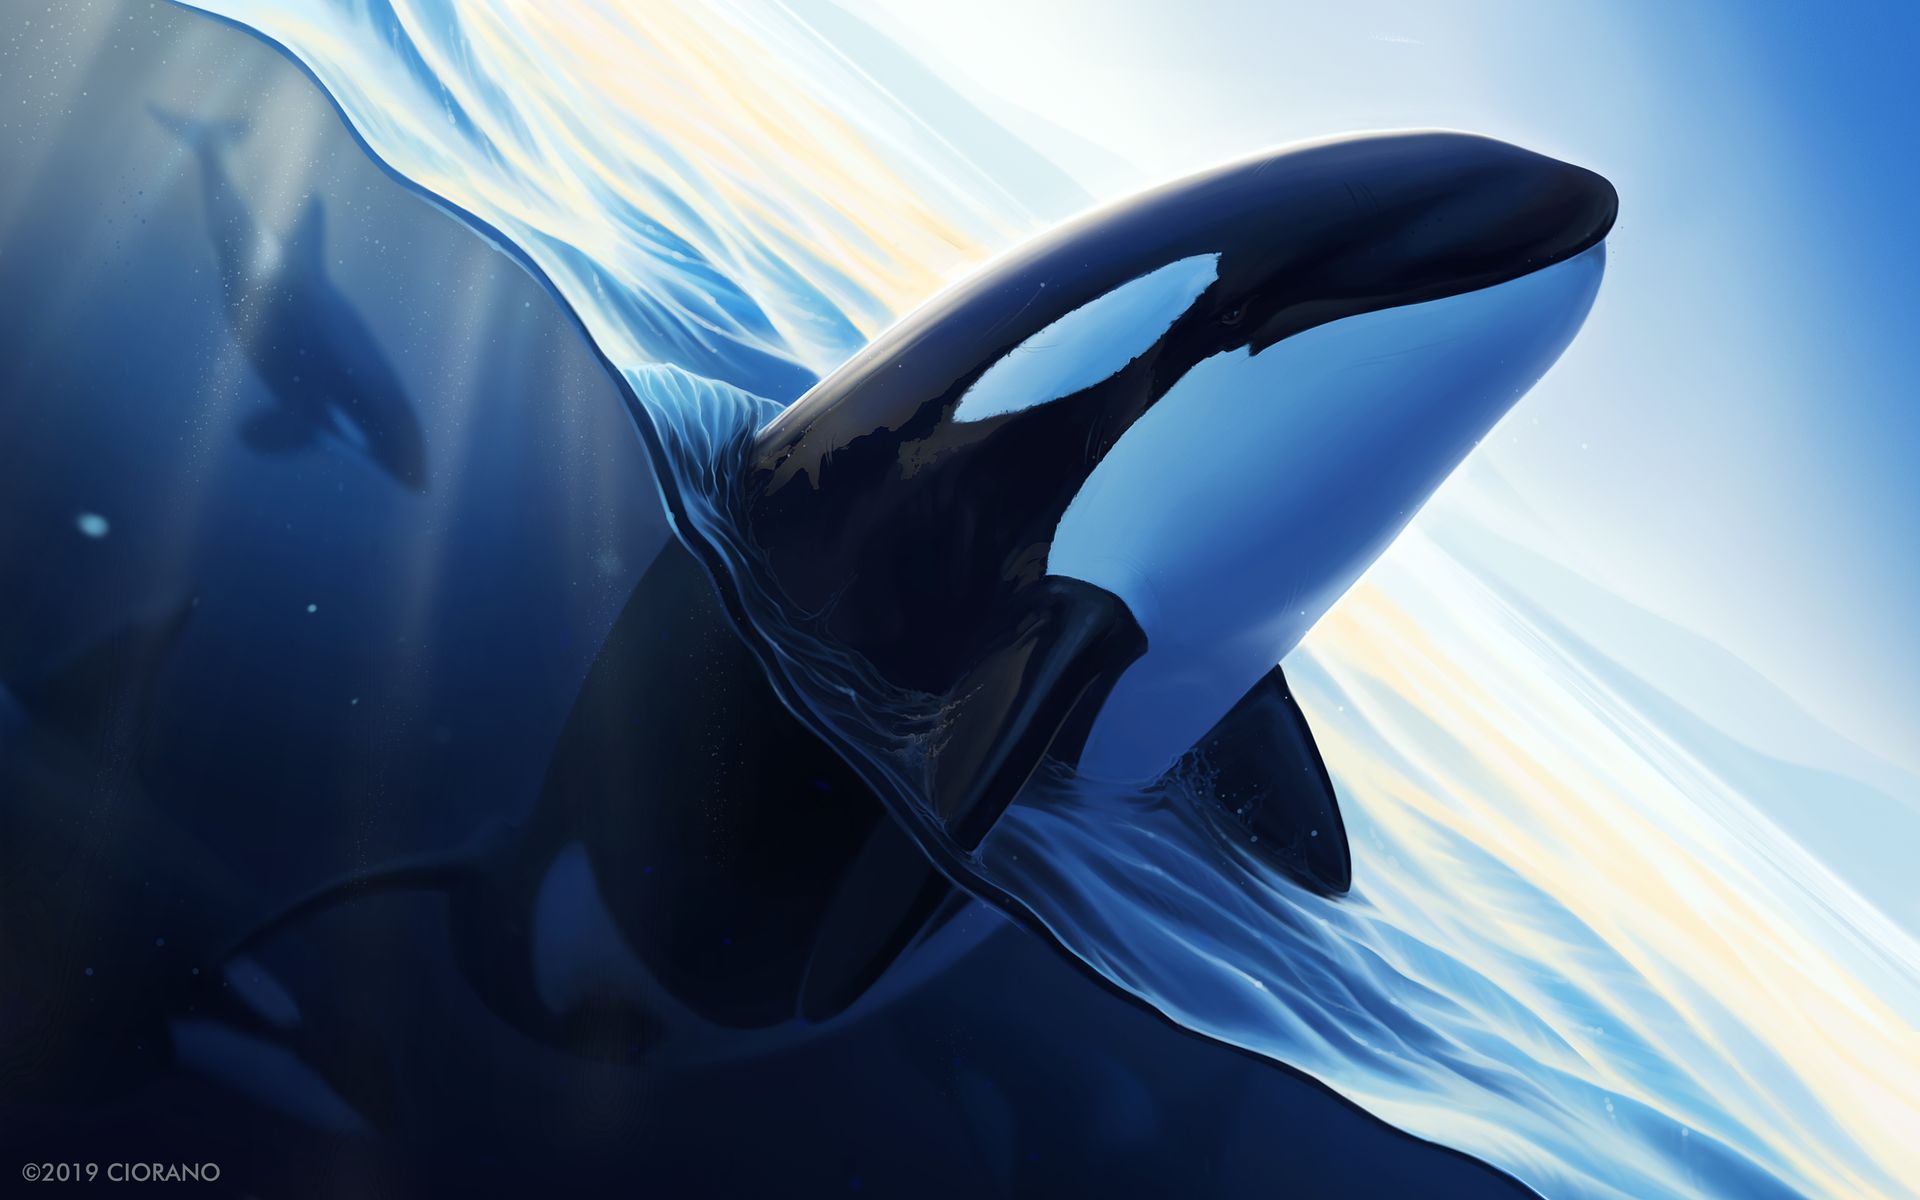 Orca Phone Wallpapers